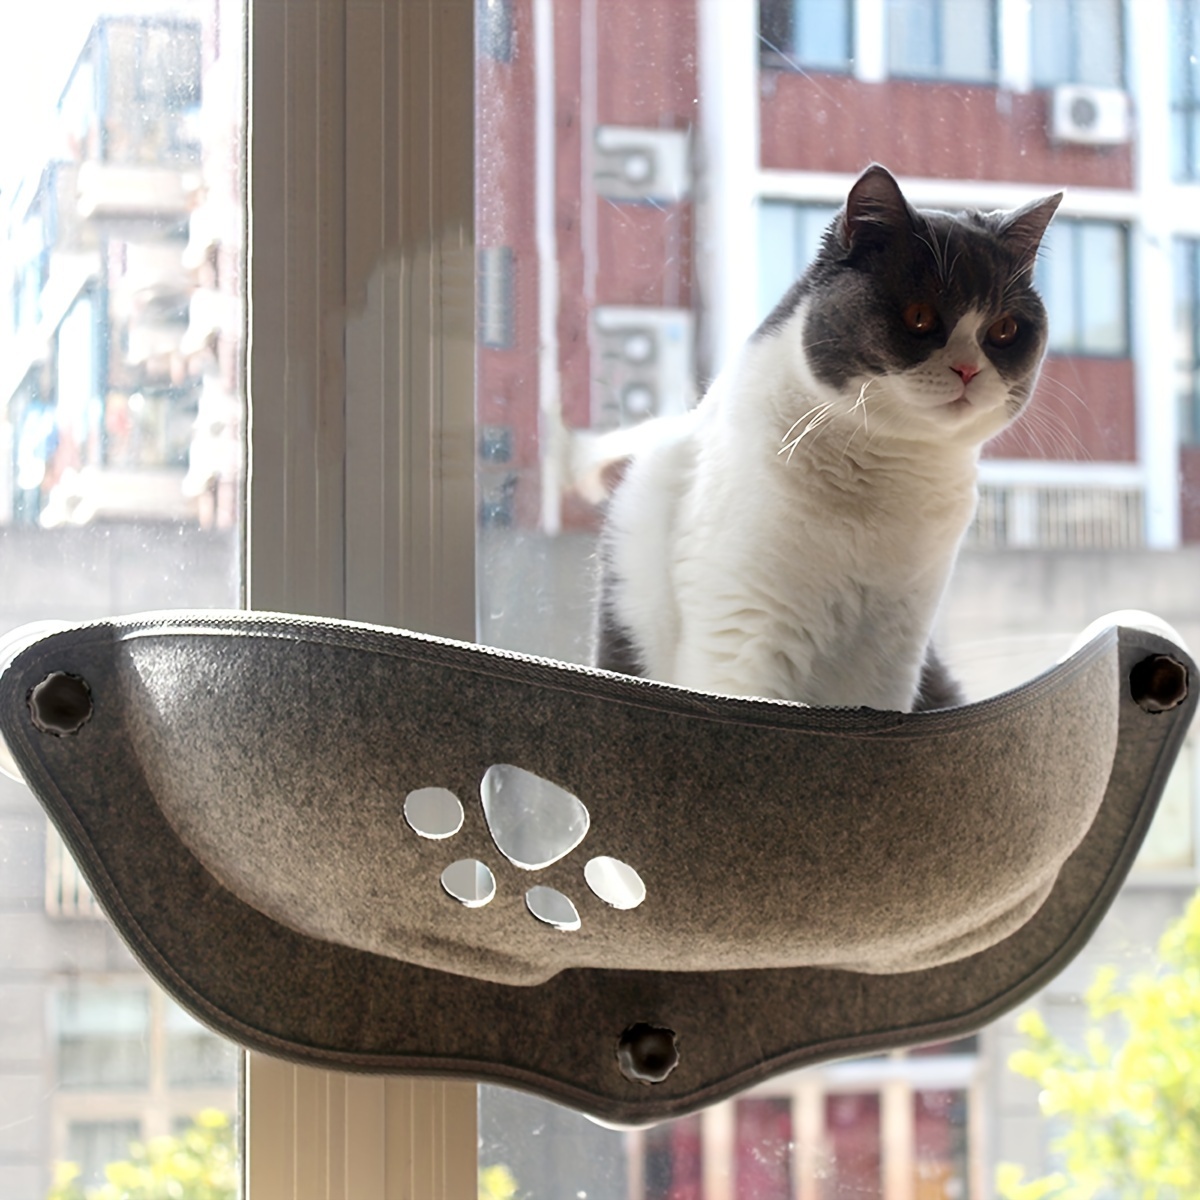 

Cozy Crescent Moon Cat Hammock With Suction Cups - Removable Polyester Window Perch For Small To Medium Cats Cat Window Hammock Cat Window Perch For Indoor Cats